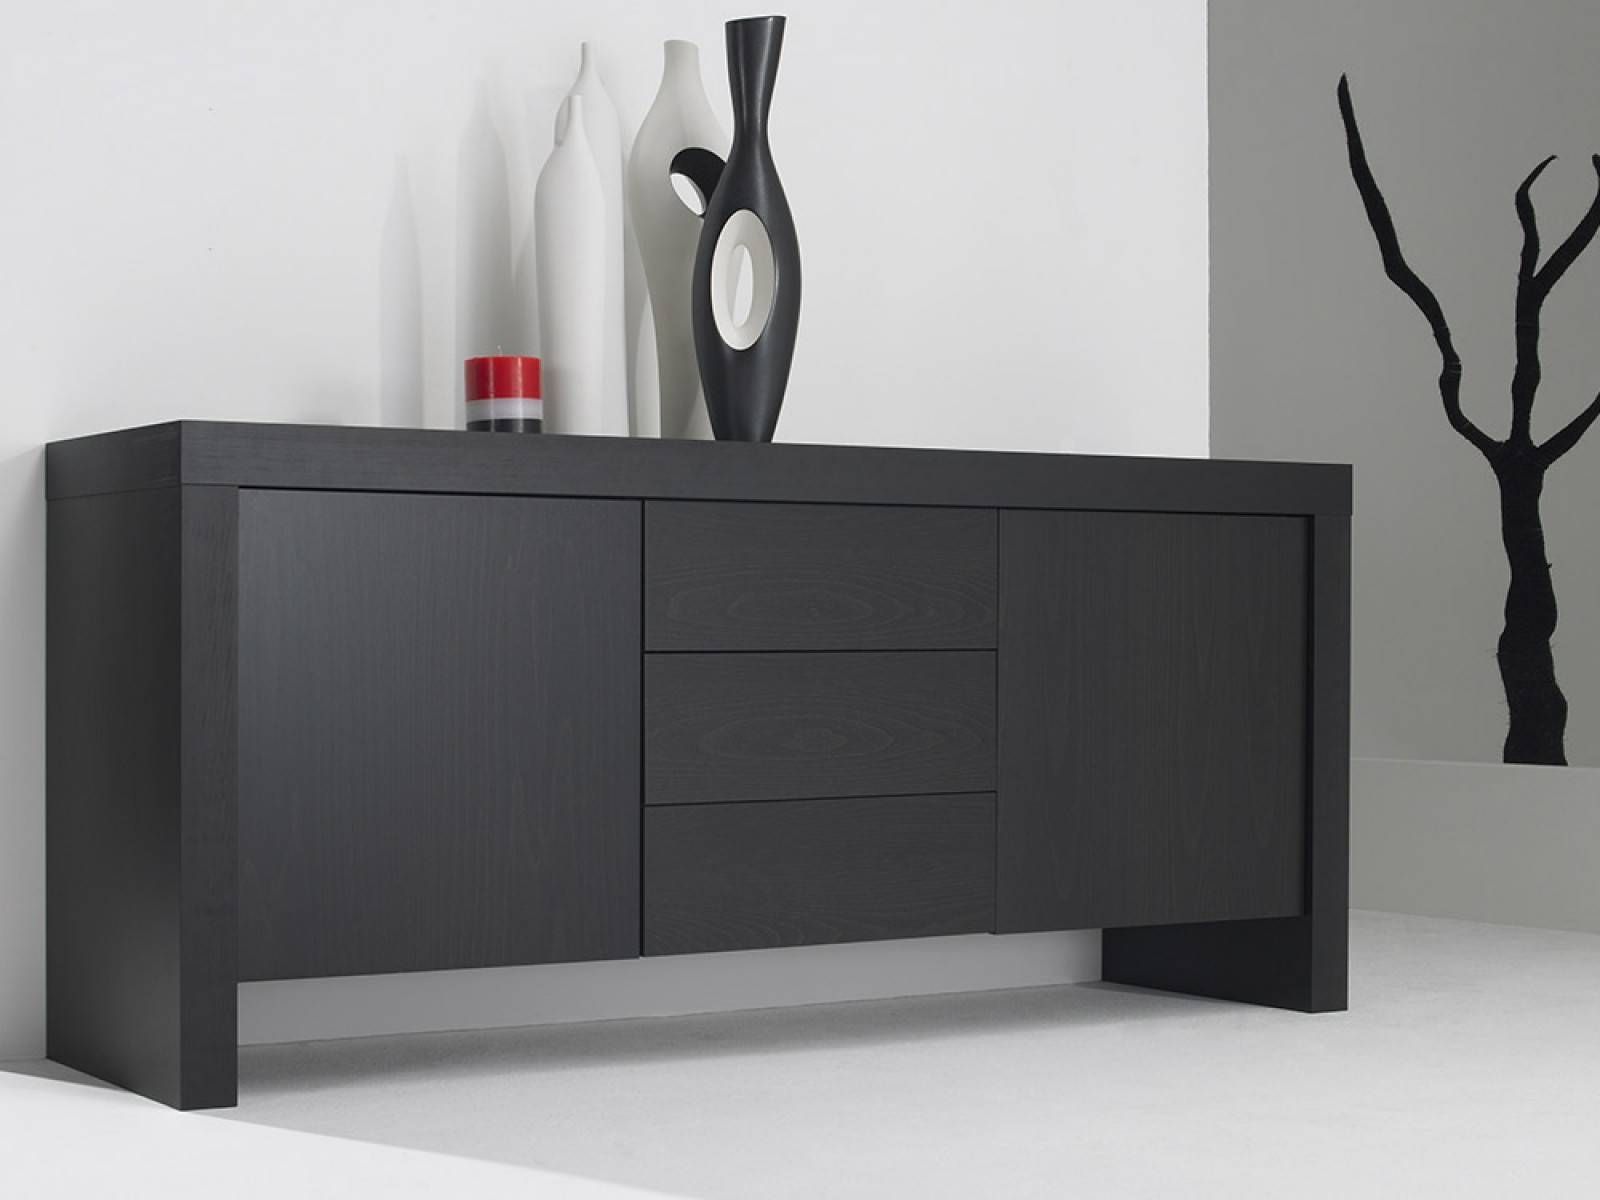 Tremendous Modern Dark Grey Sideboard Design With Two Cabinet Pertaining To Dark Sideboards (View 15 of 30)